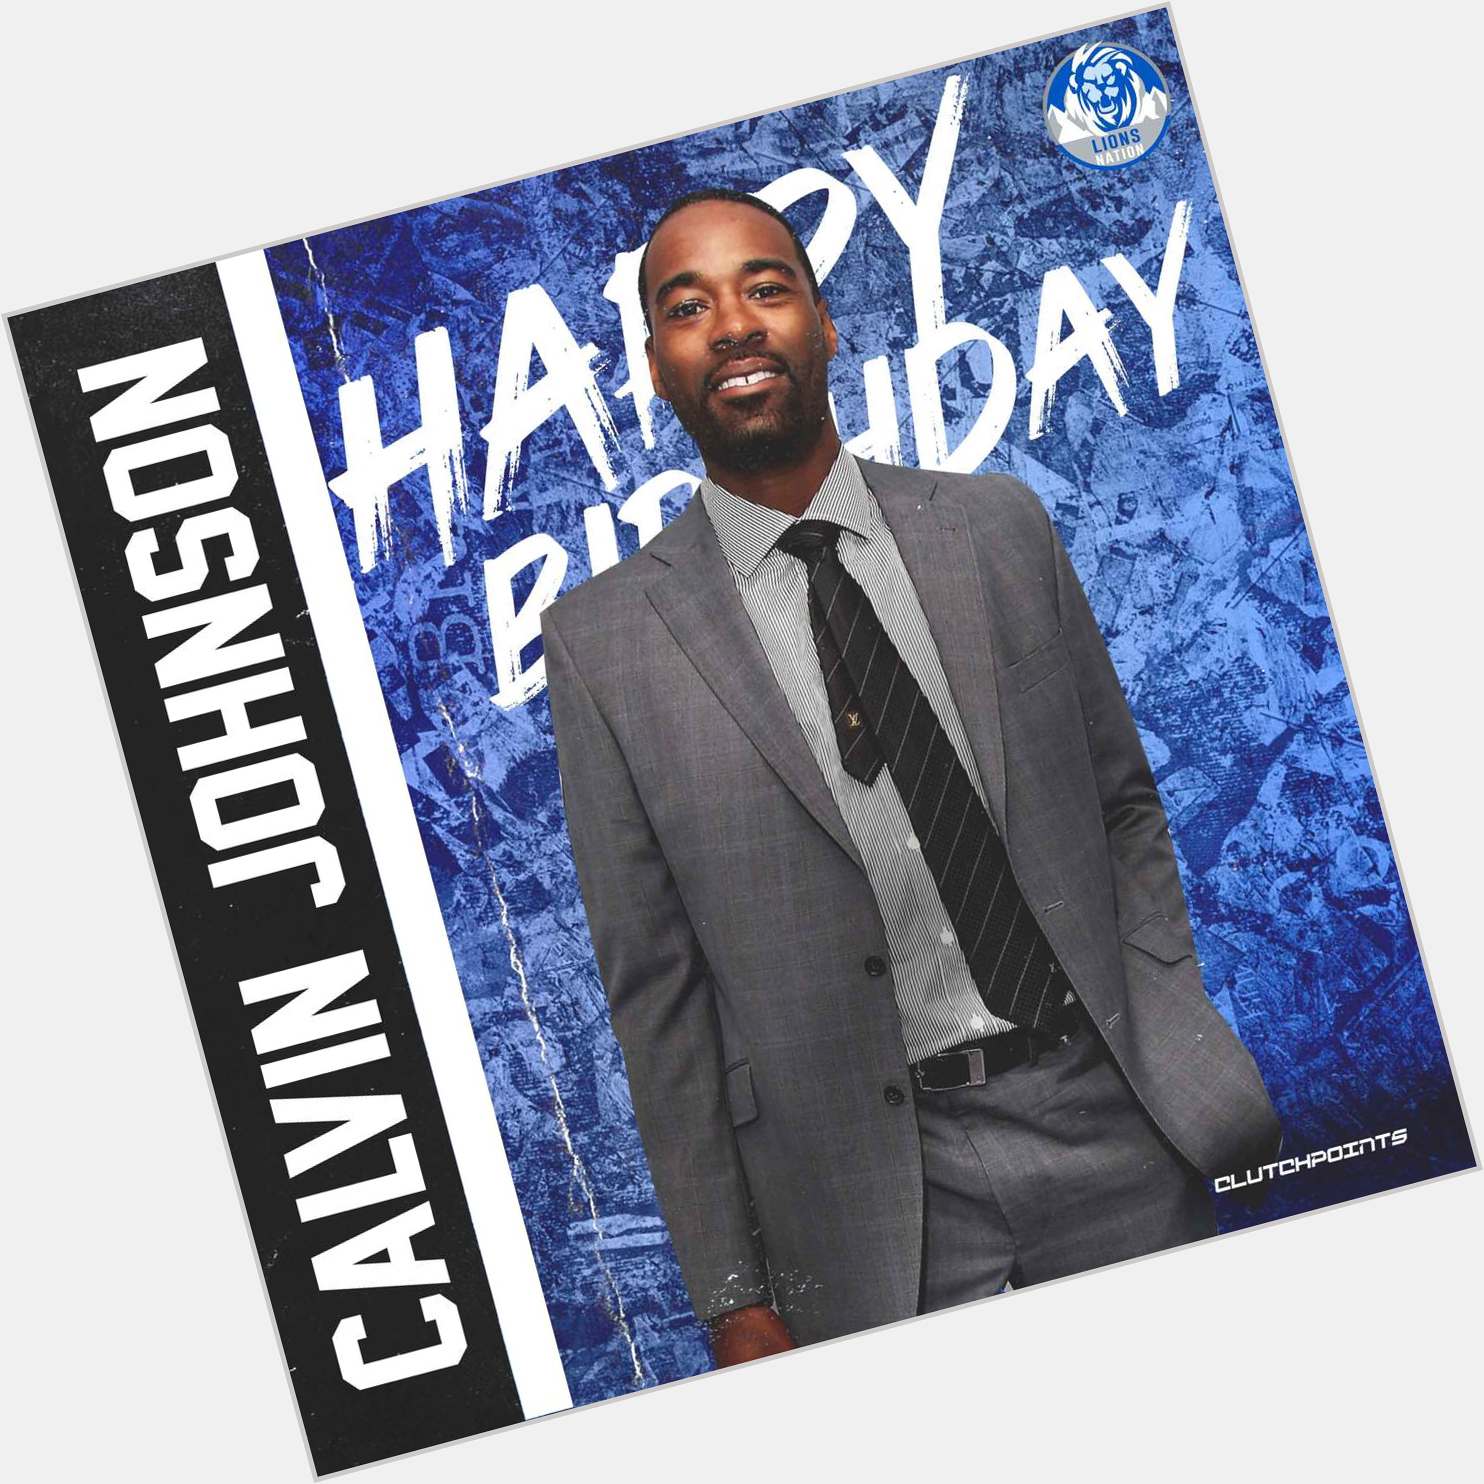 Lions Nation, join us in wishing Calvin Johnson a happy 37th birthday 